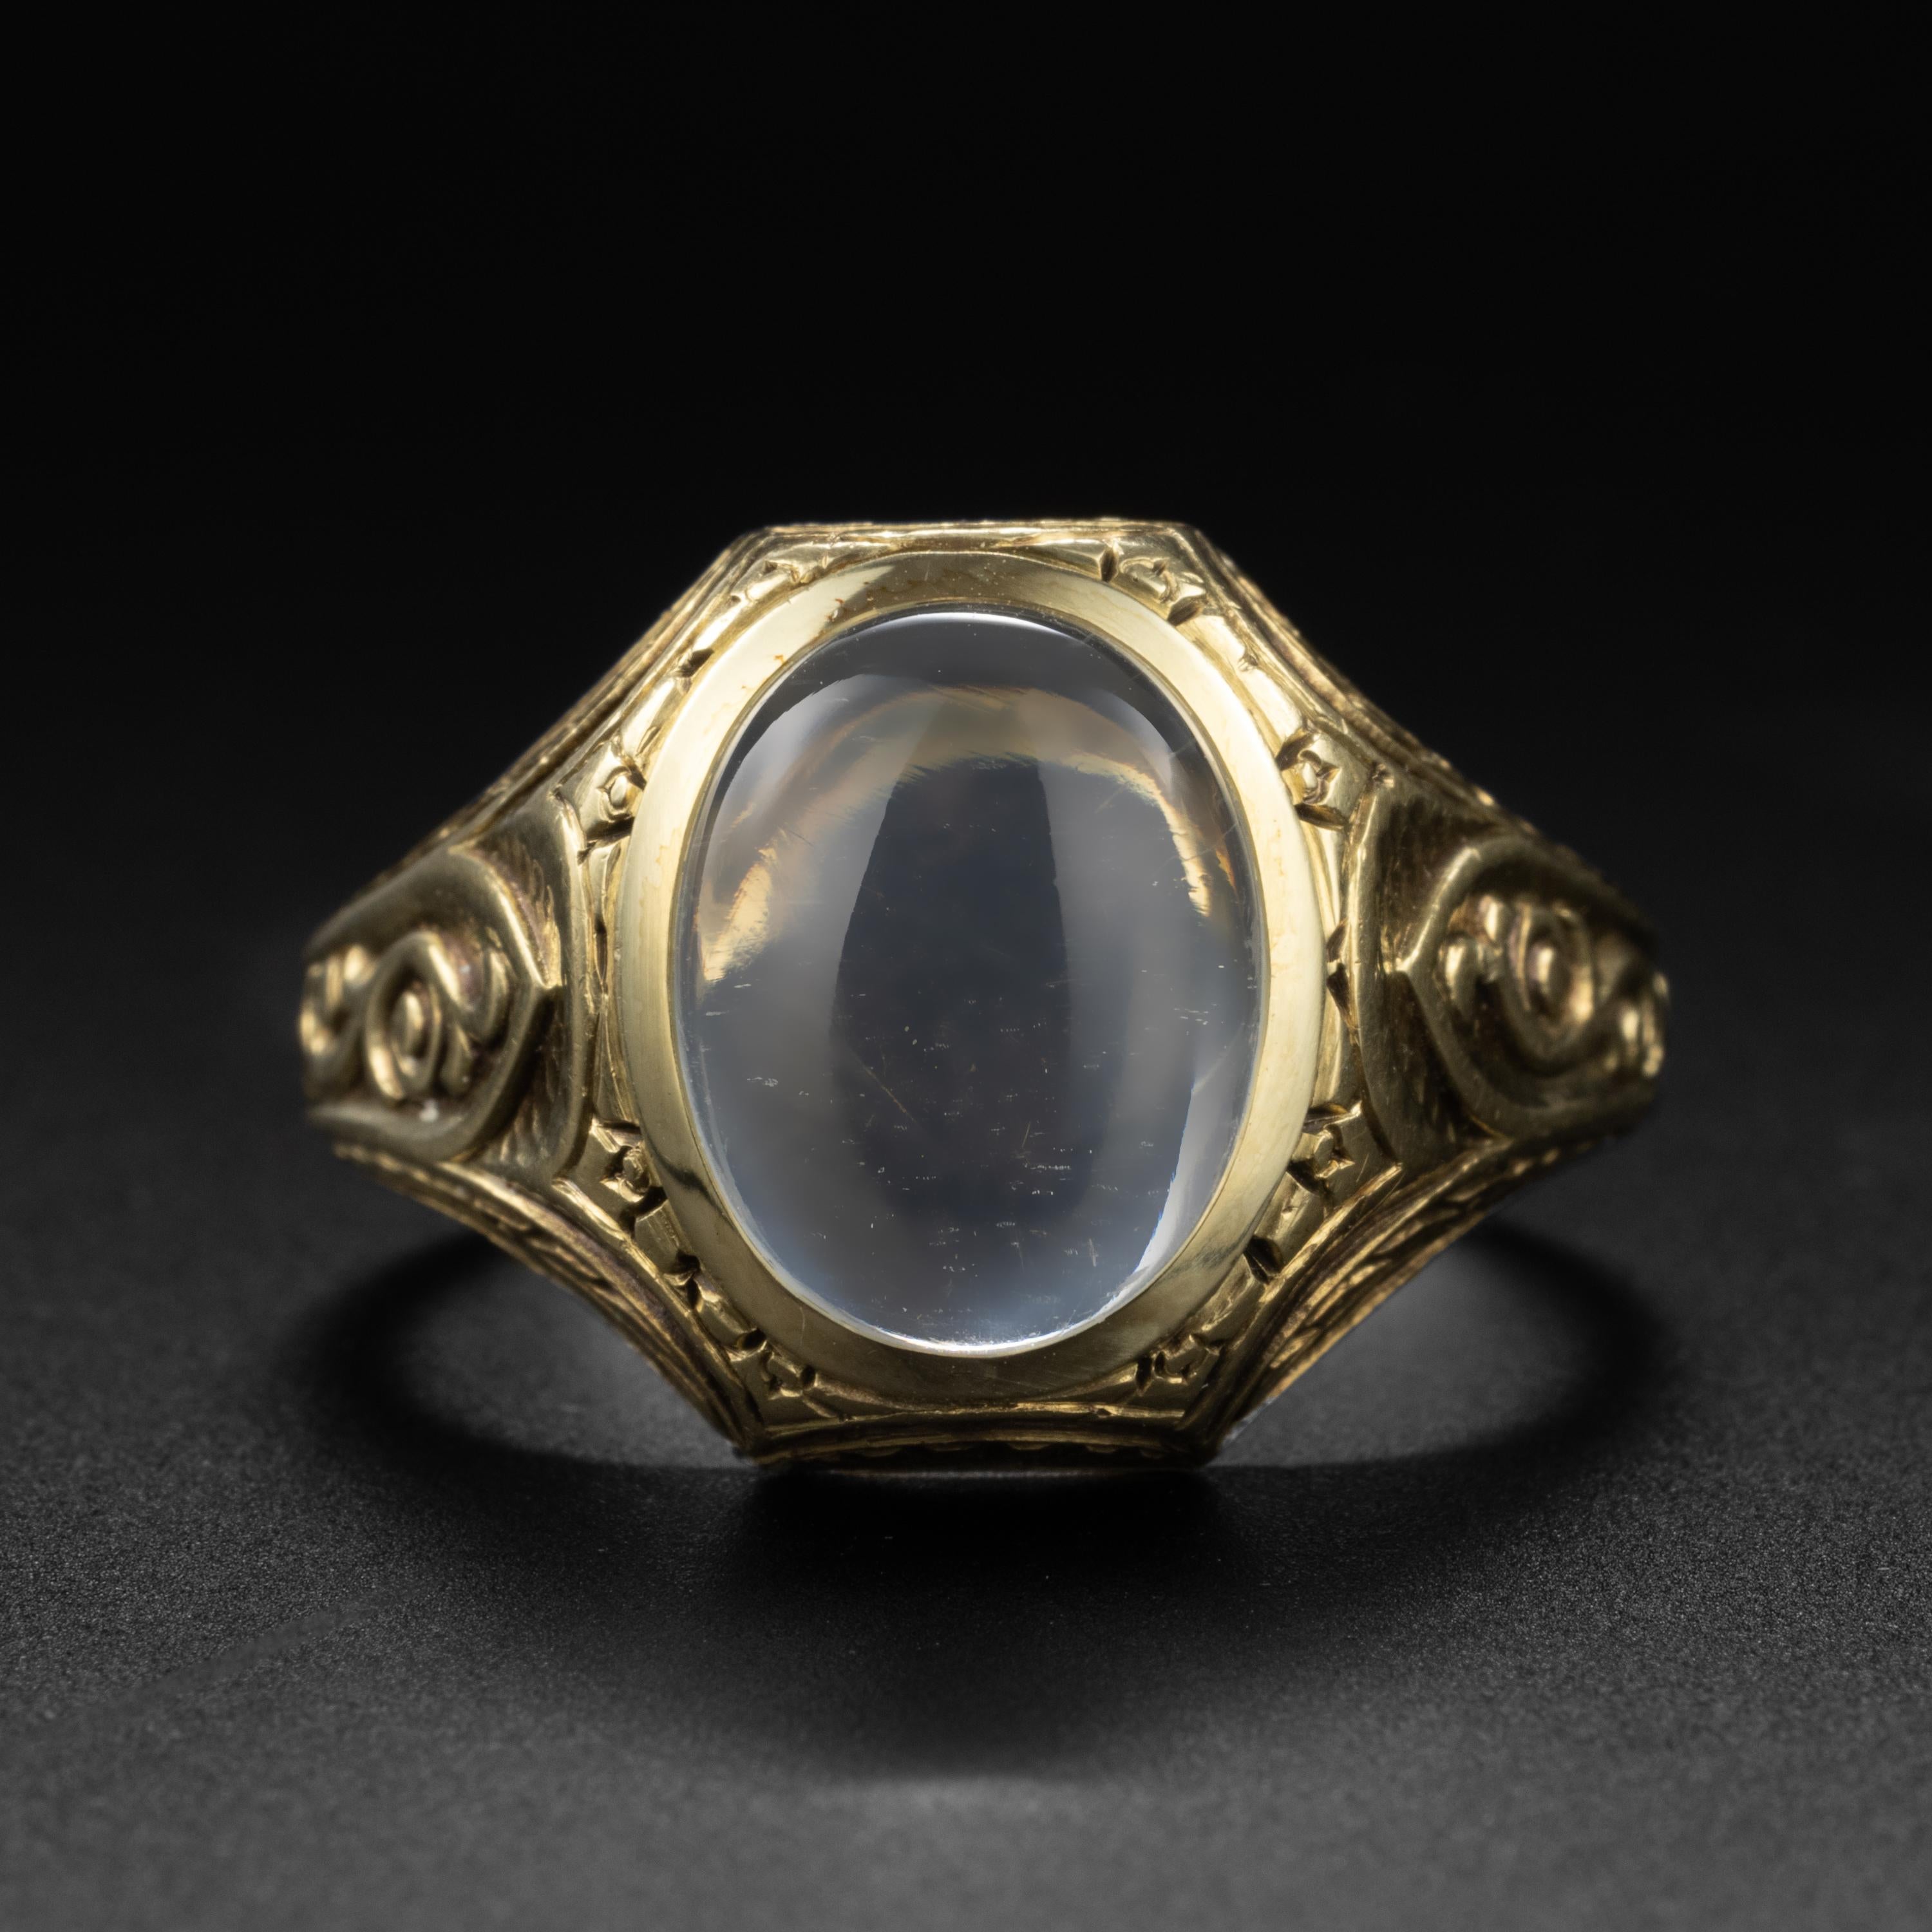 Created by the iconic firm, Allsopp Bros in or around 1925, this 14K yellow gold ring has been deeply engraved with the masculine desicn elements of the day: laurel branches, architectural arches, and on the shoulders, a motif of swirls, possibly